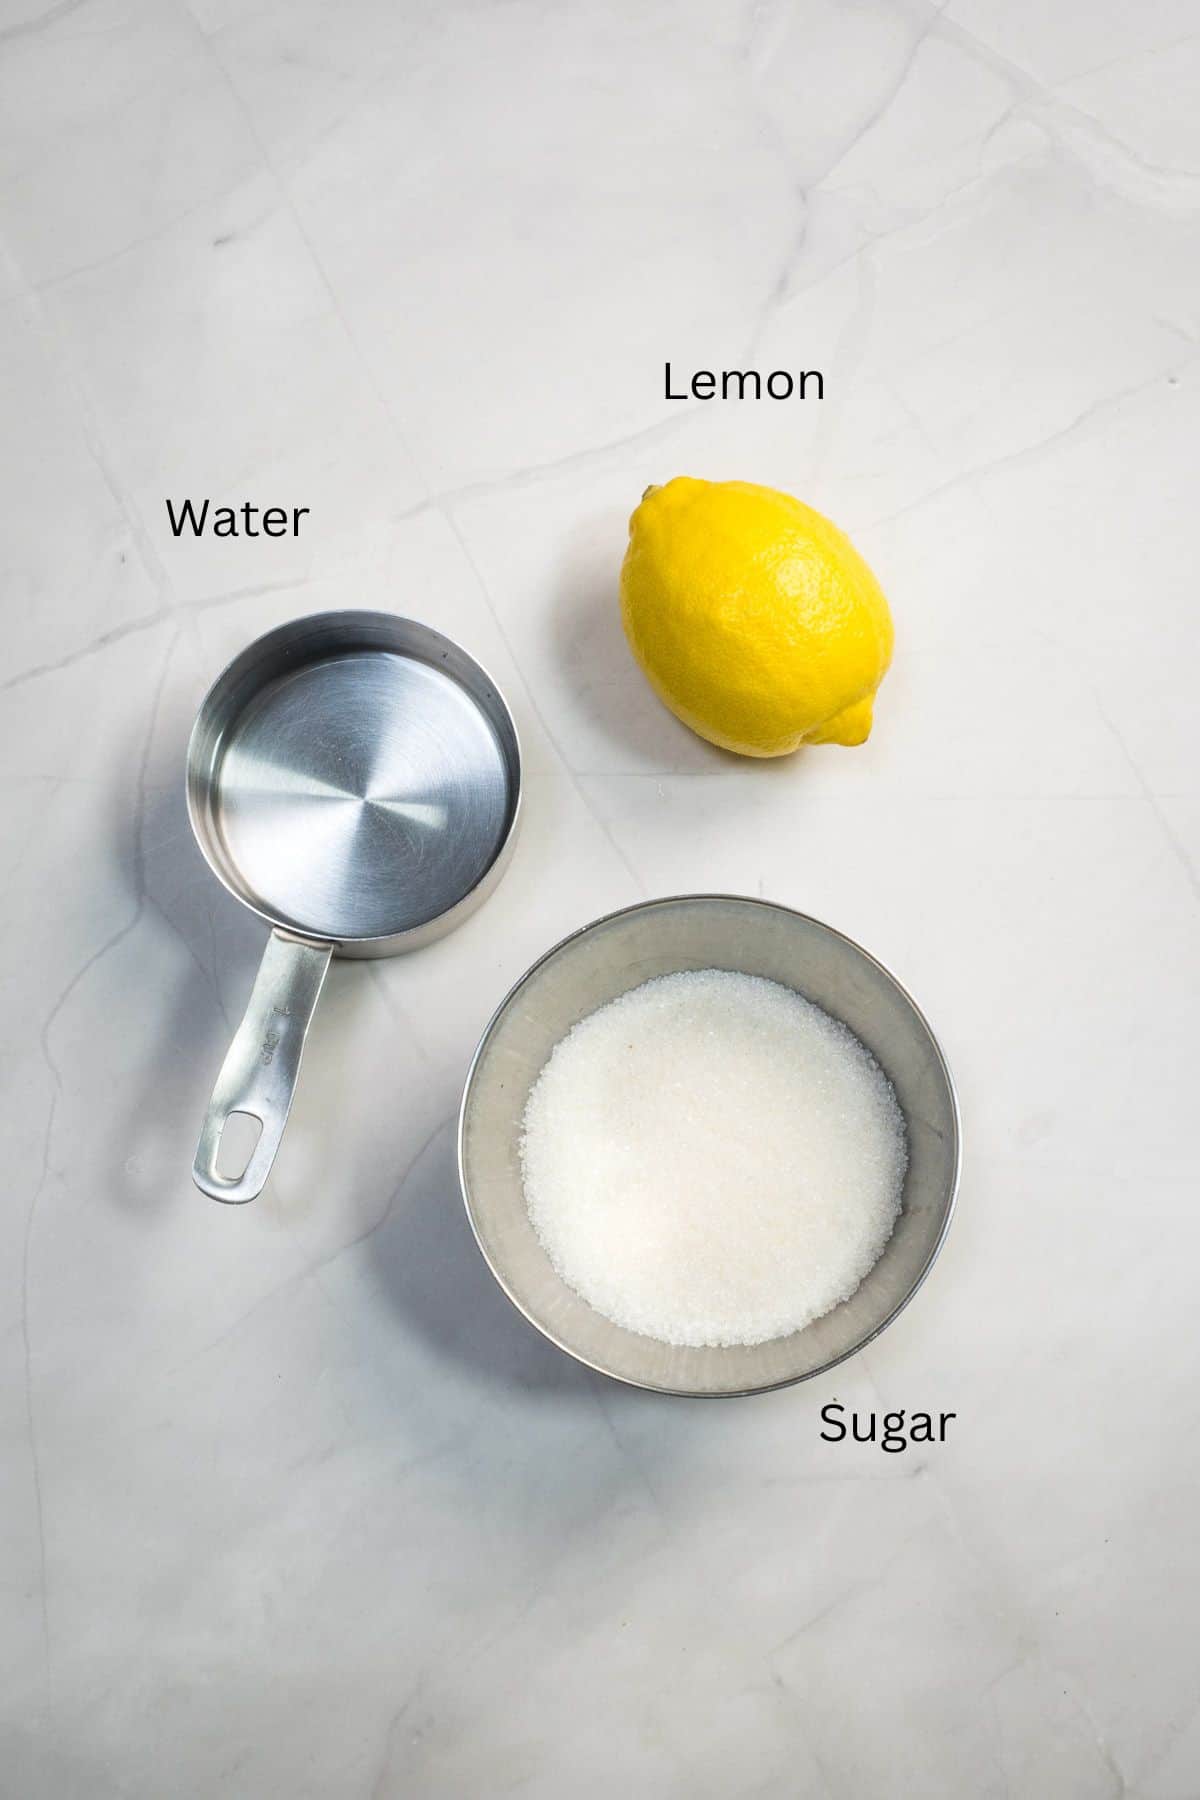 Water, sugar and a lemon against a marble background.